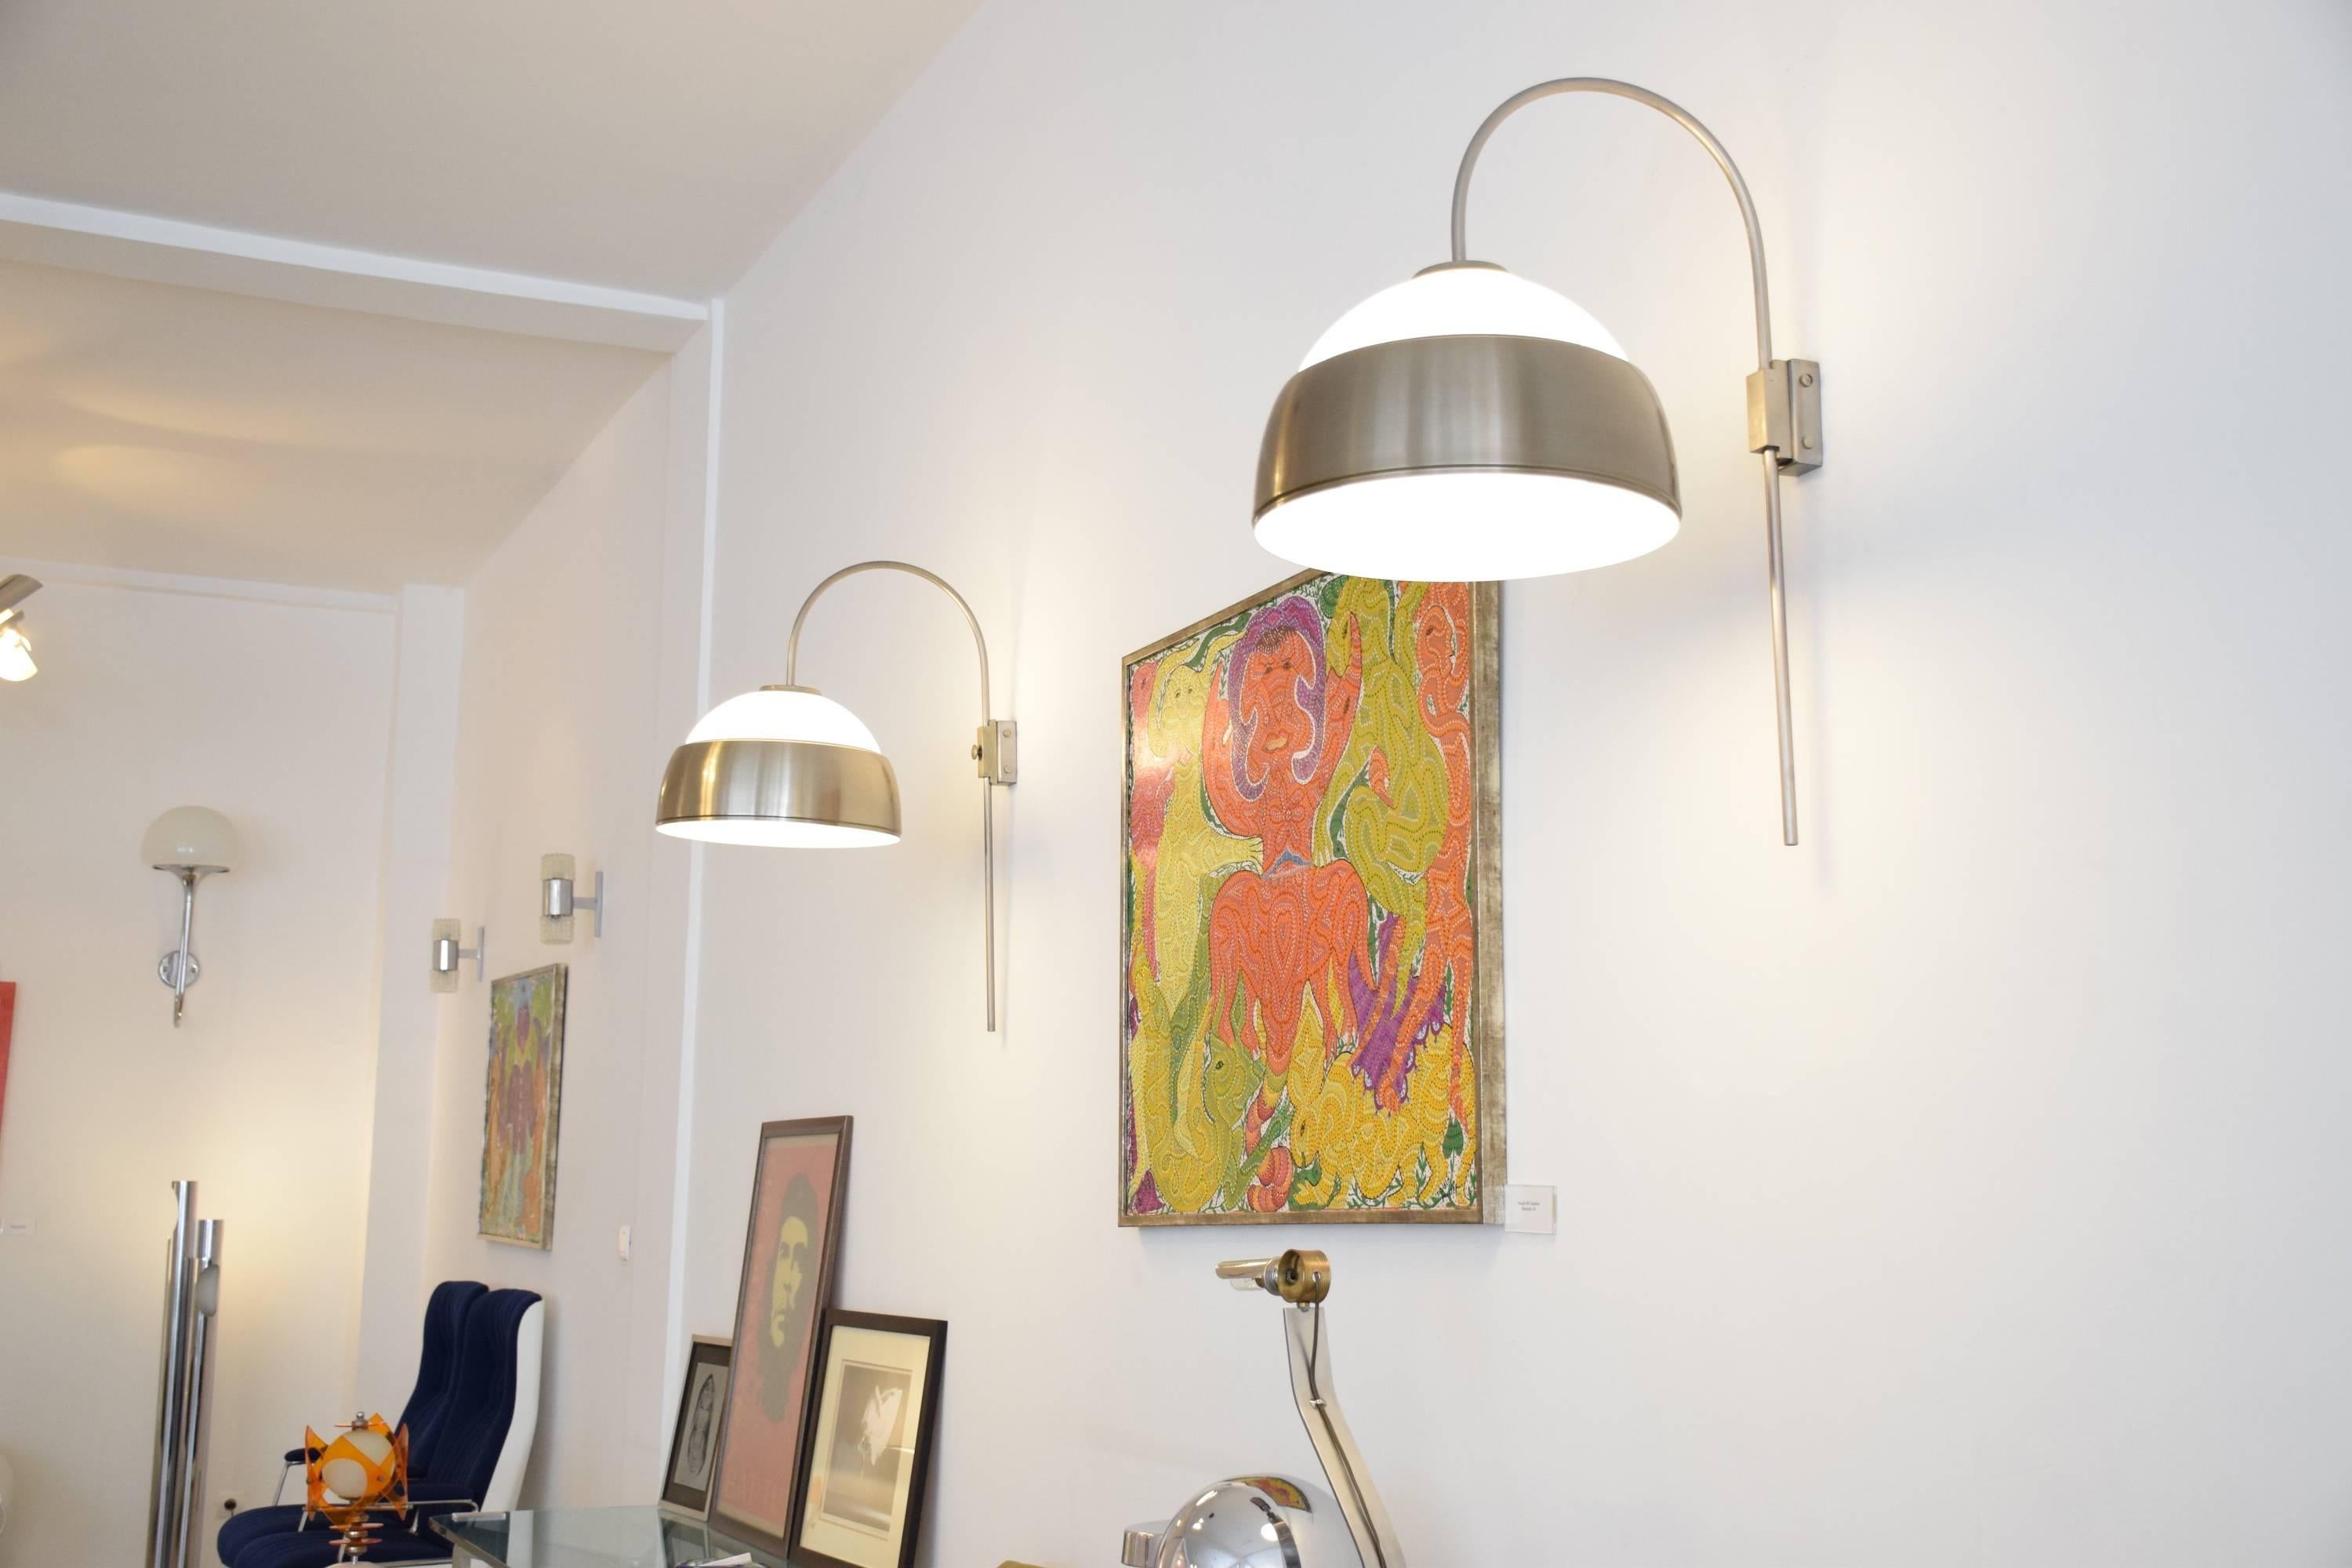 20th century vintage set of two tall and big wall lamps or sconces of Italian origin built in the 1960s. These two lights are very practical since they are adjustable in height and are composed of a polished chrome structure and impressive opal